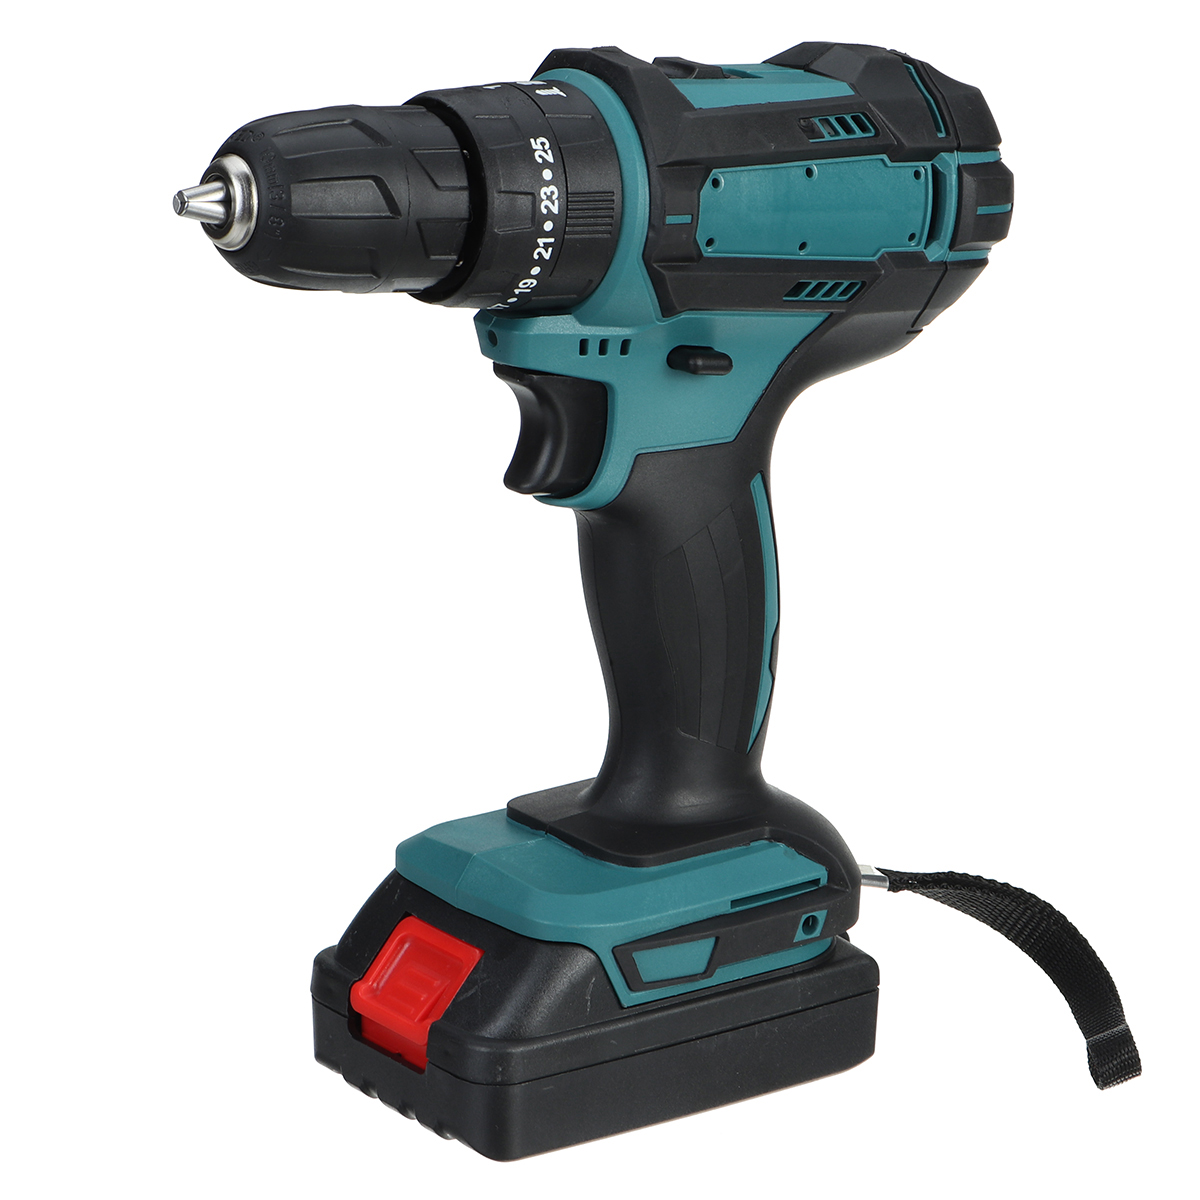 18V-Electric-Drill-Rechargeable-Screwdriver-Flat-Drill-Impact-Wrench-w-None-or-1pc-or-2pcs-Battery-1798111-10